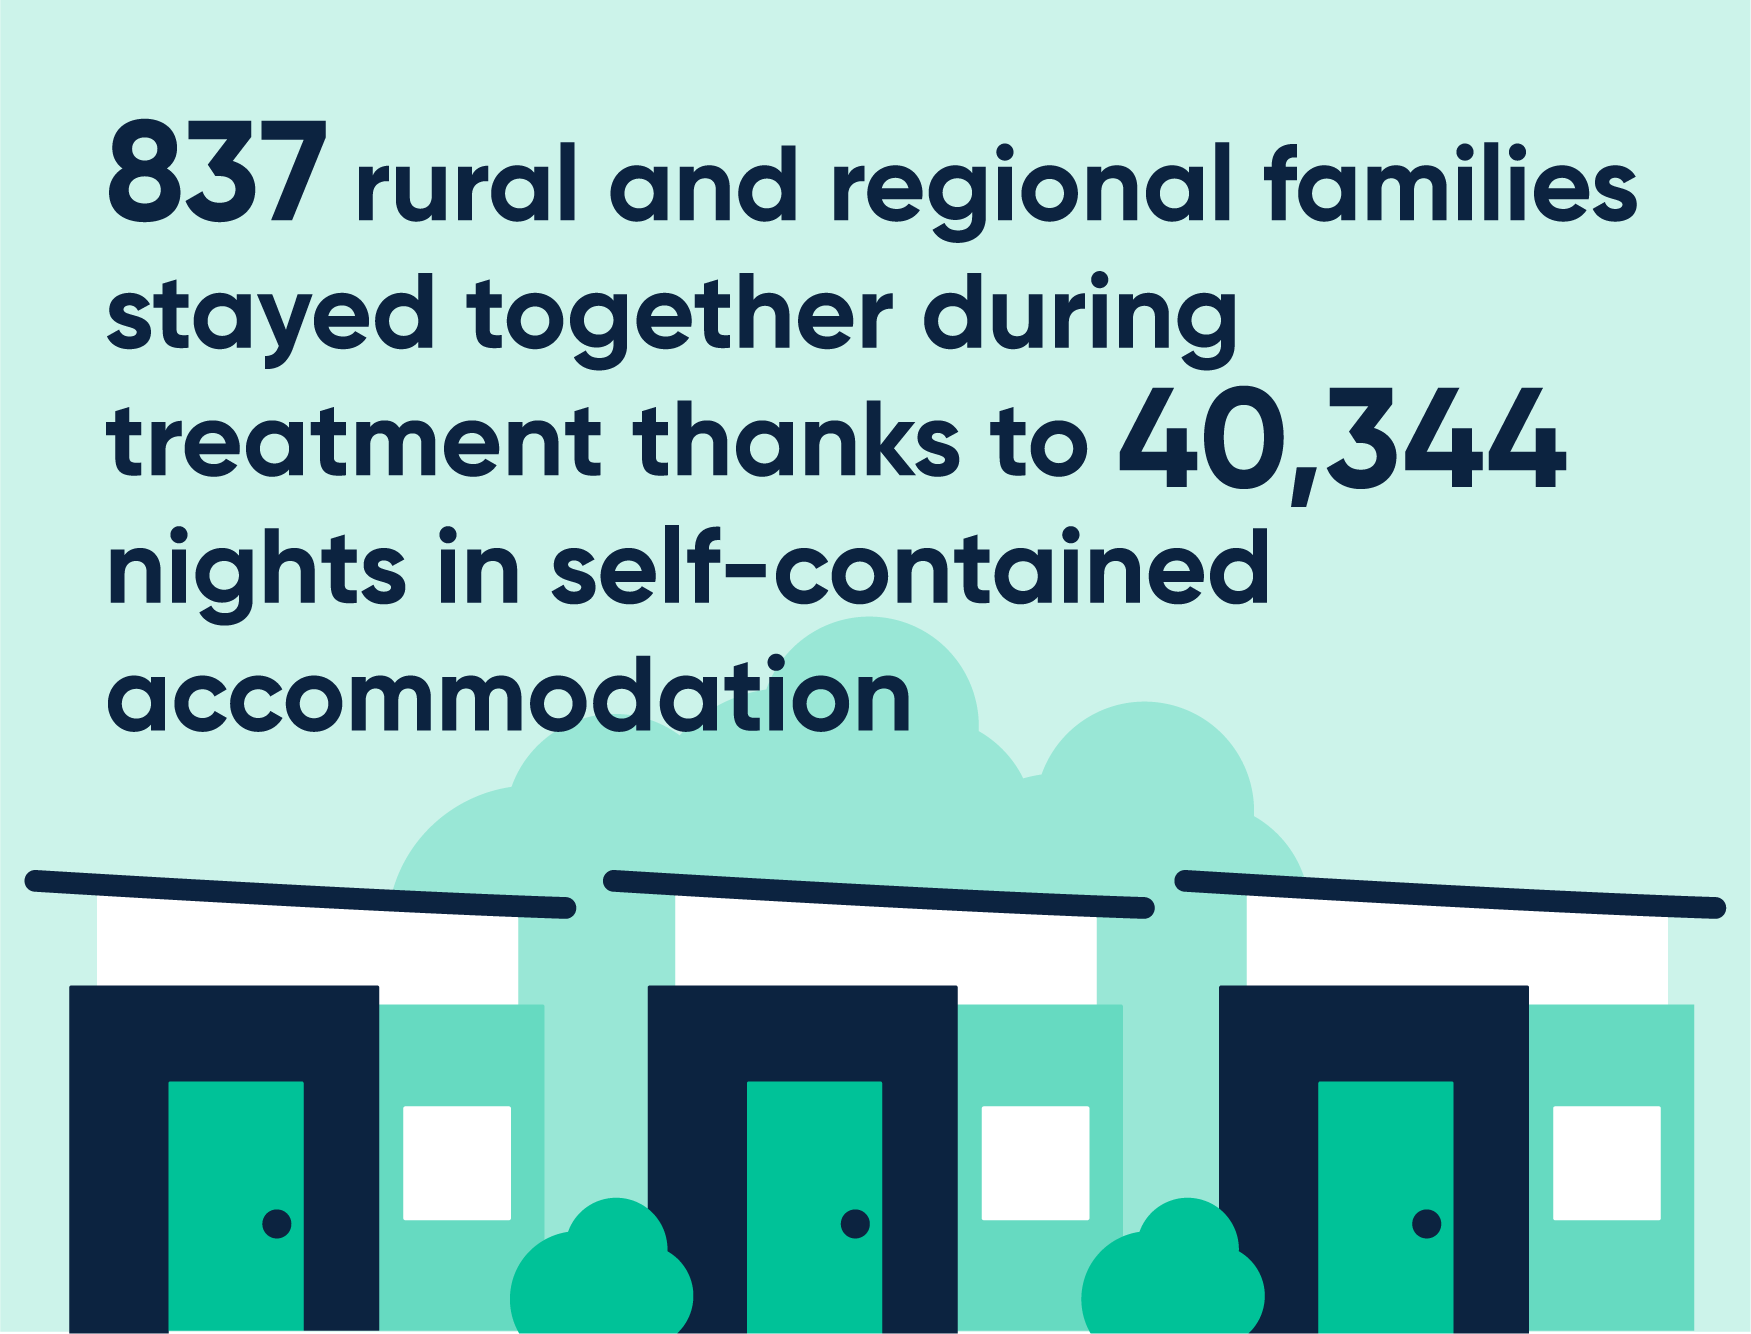 837 rural and regional families stayed together during treatment thanks to 40,344 nights in self-contained accommodation